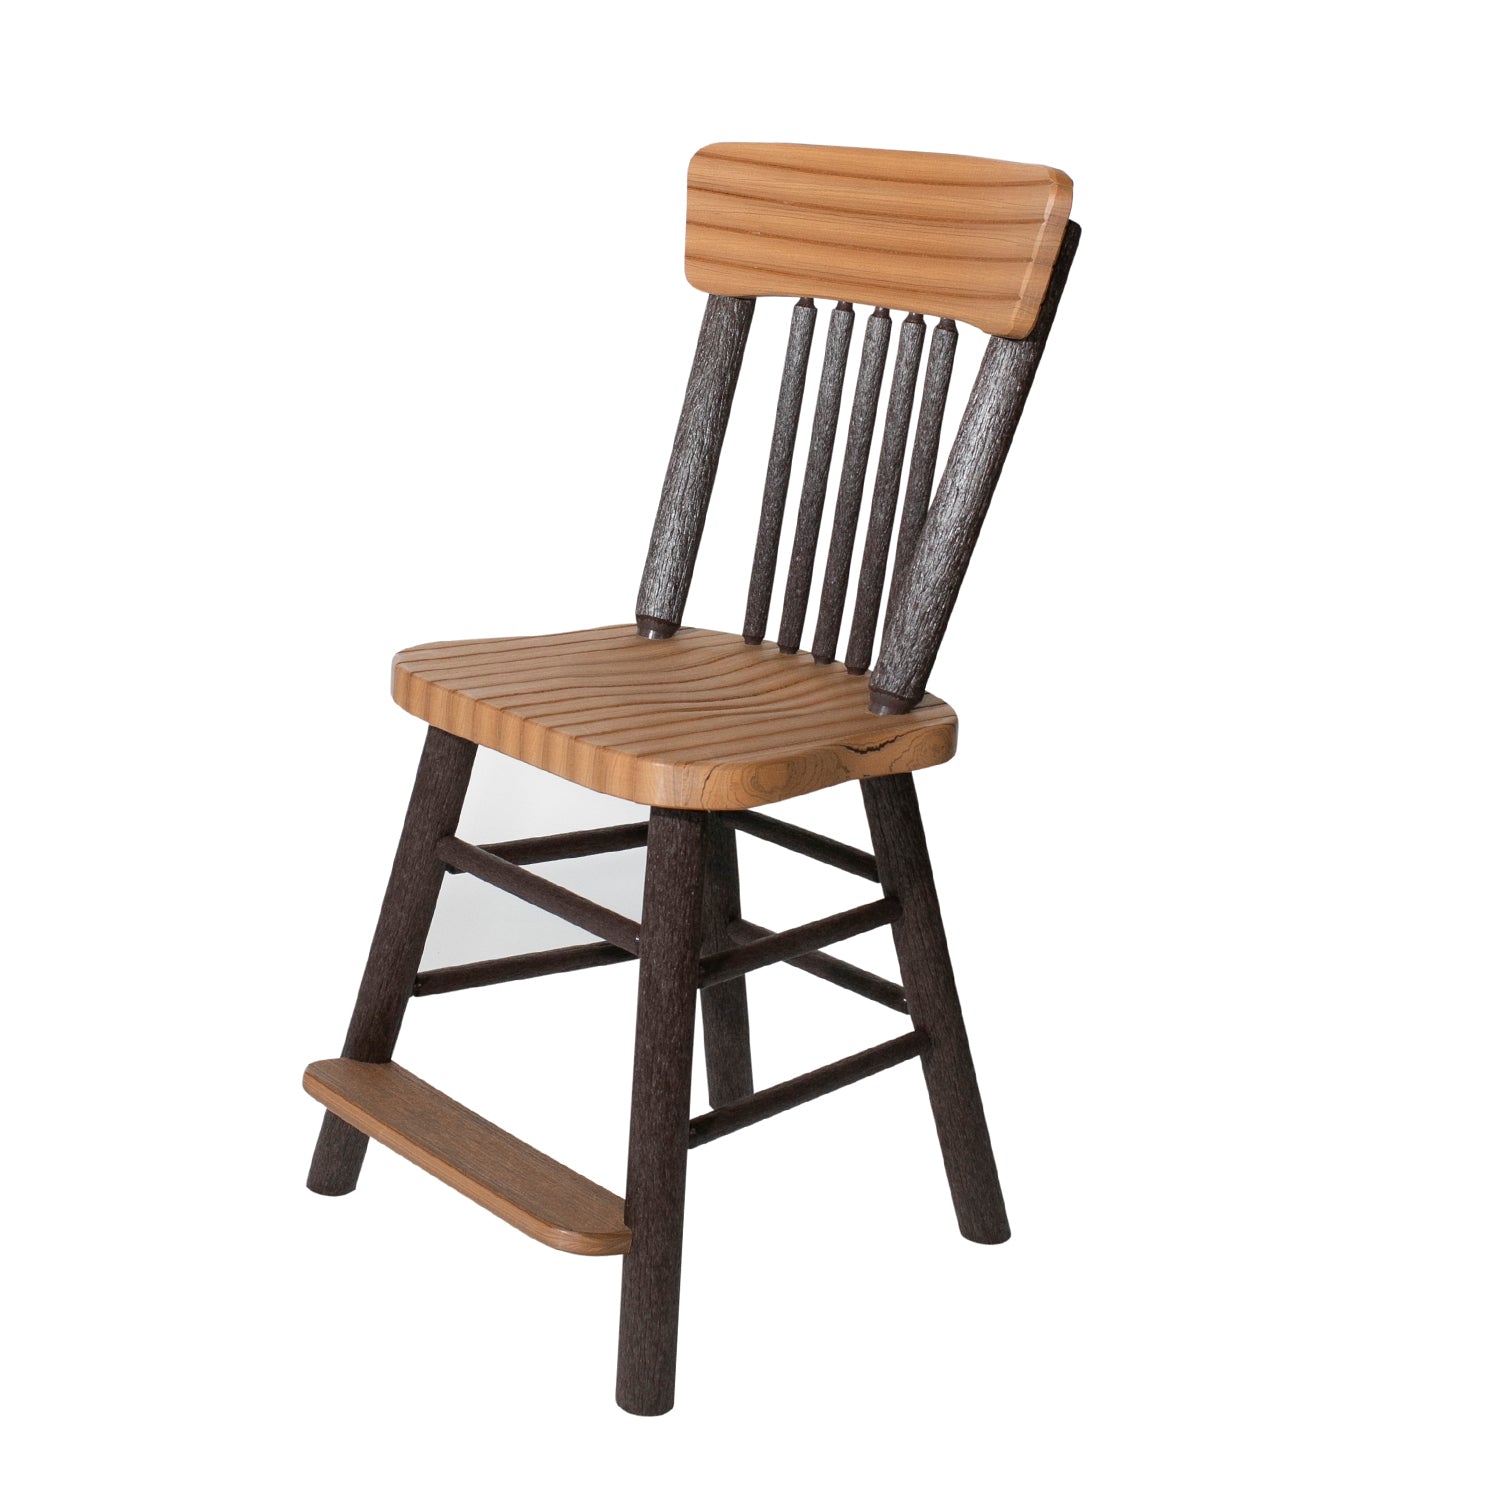 Great Woods Rustic PolyLog Balcony Height Side Chair